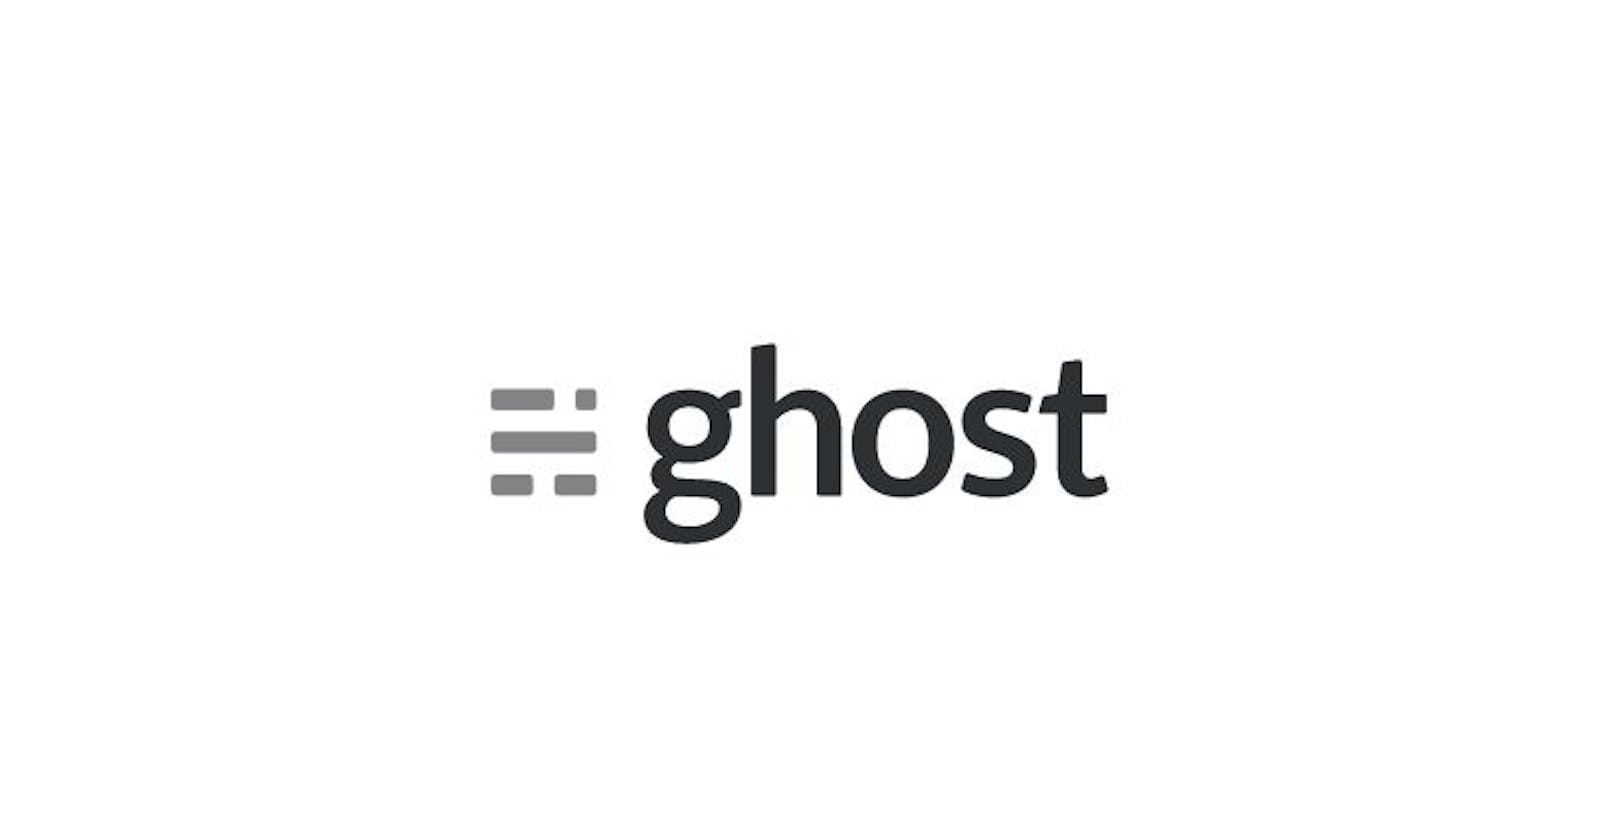 Reasons I Changed From WordPress to Ghost